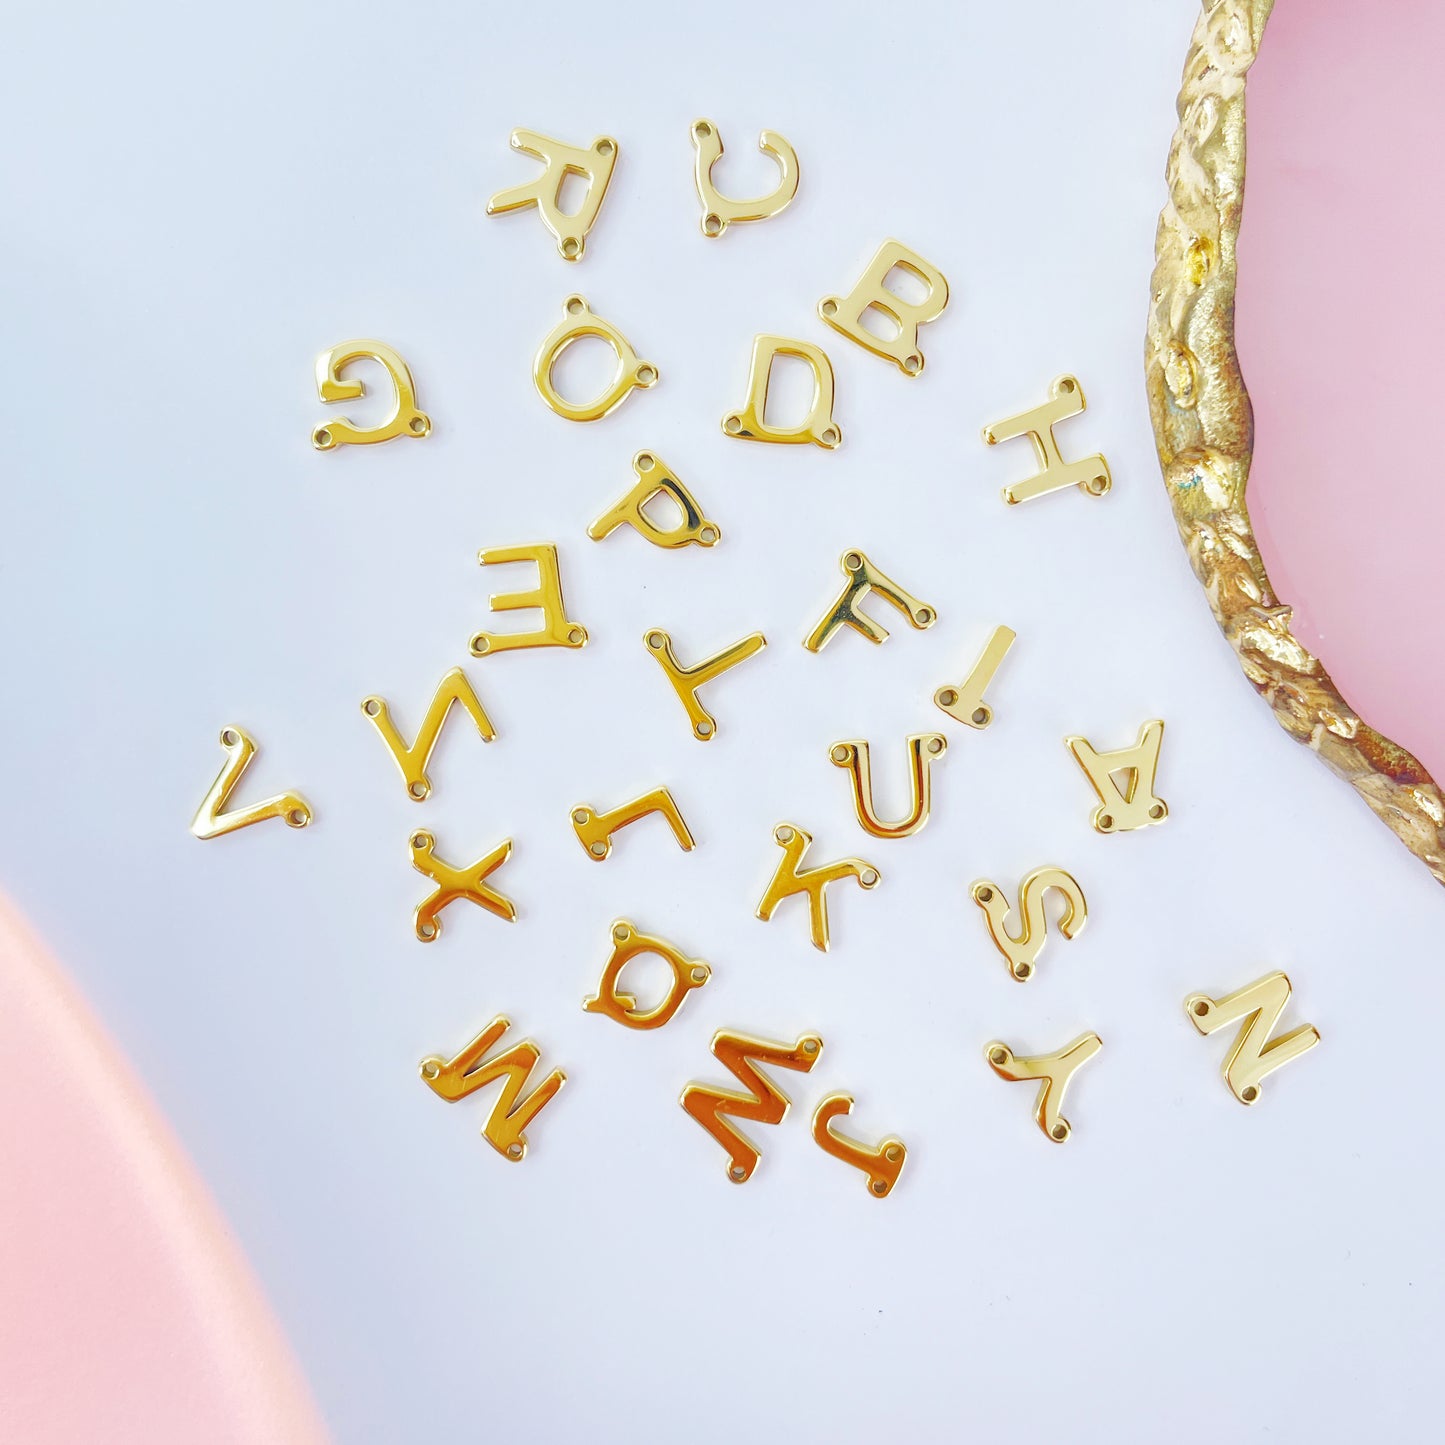 AW0265 26 letters necklace pendant